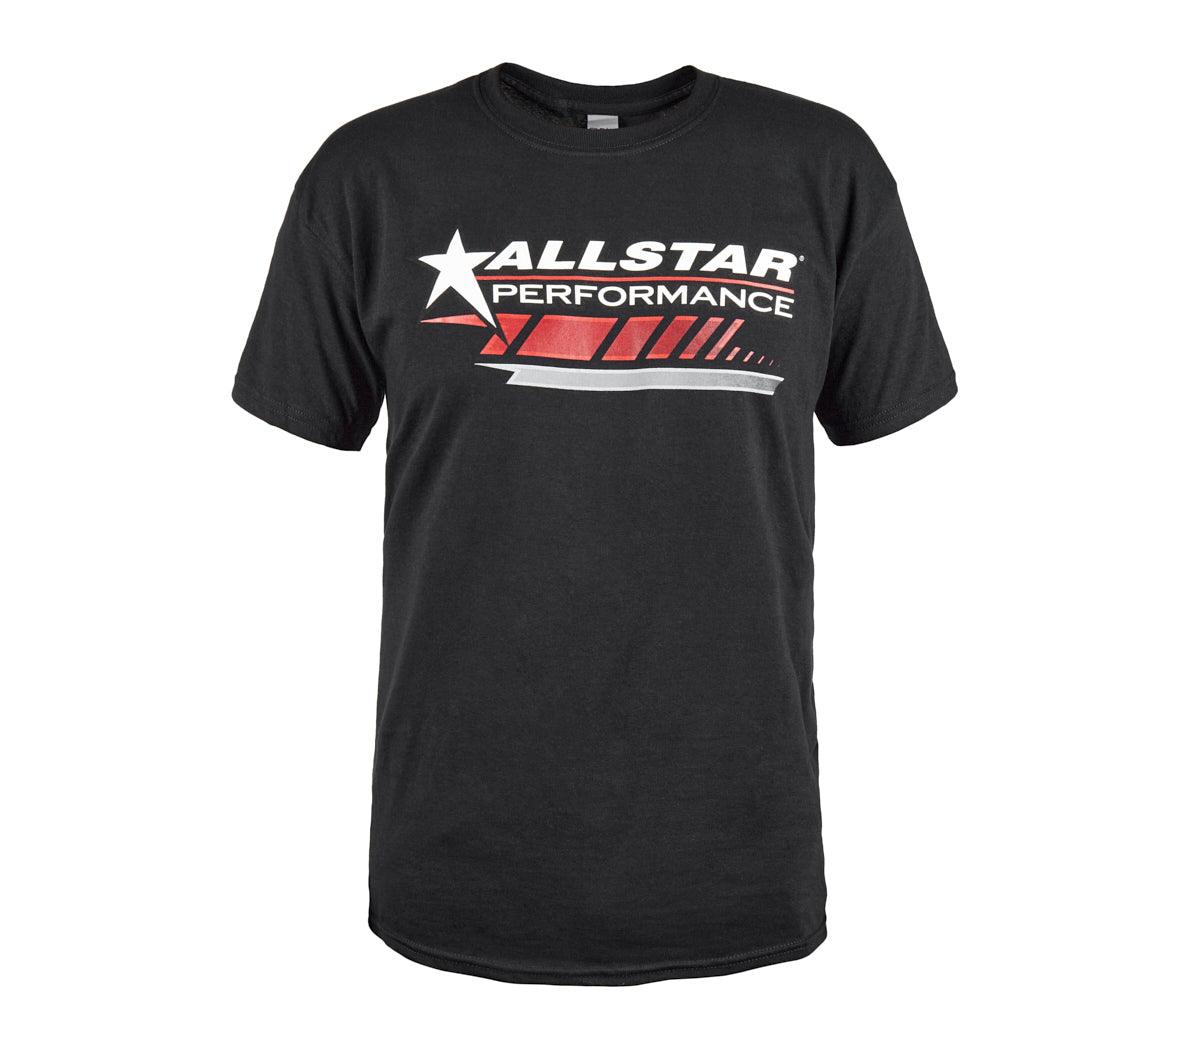 Allstar T-Shirt Black w/ Red Graphic X-Large - Burlile Performance Products